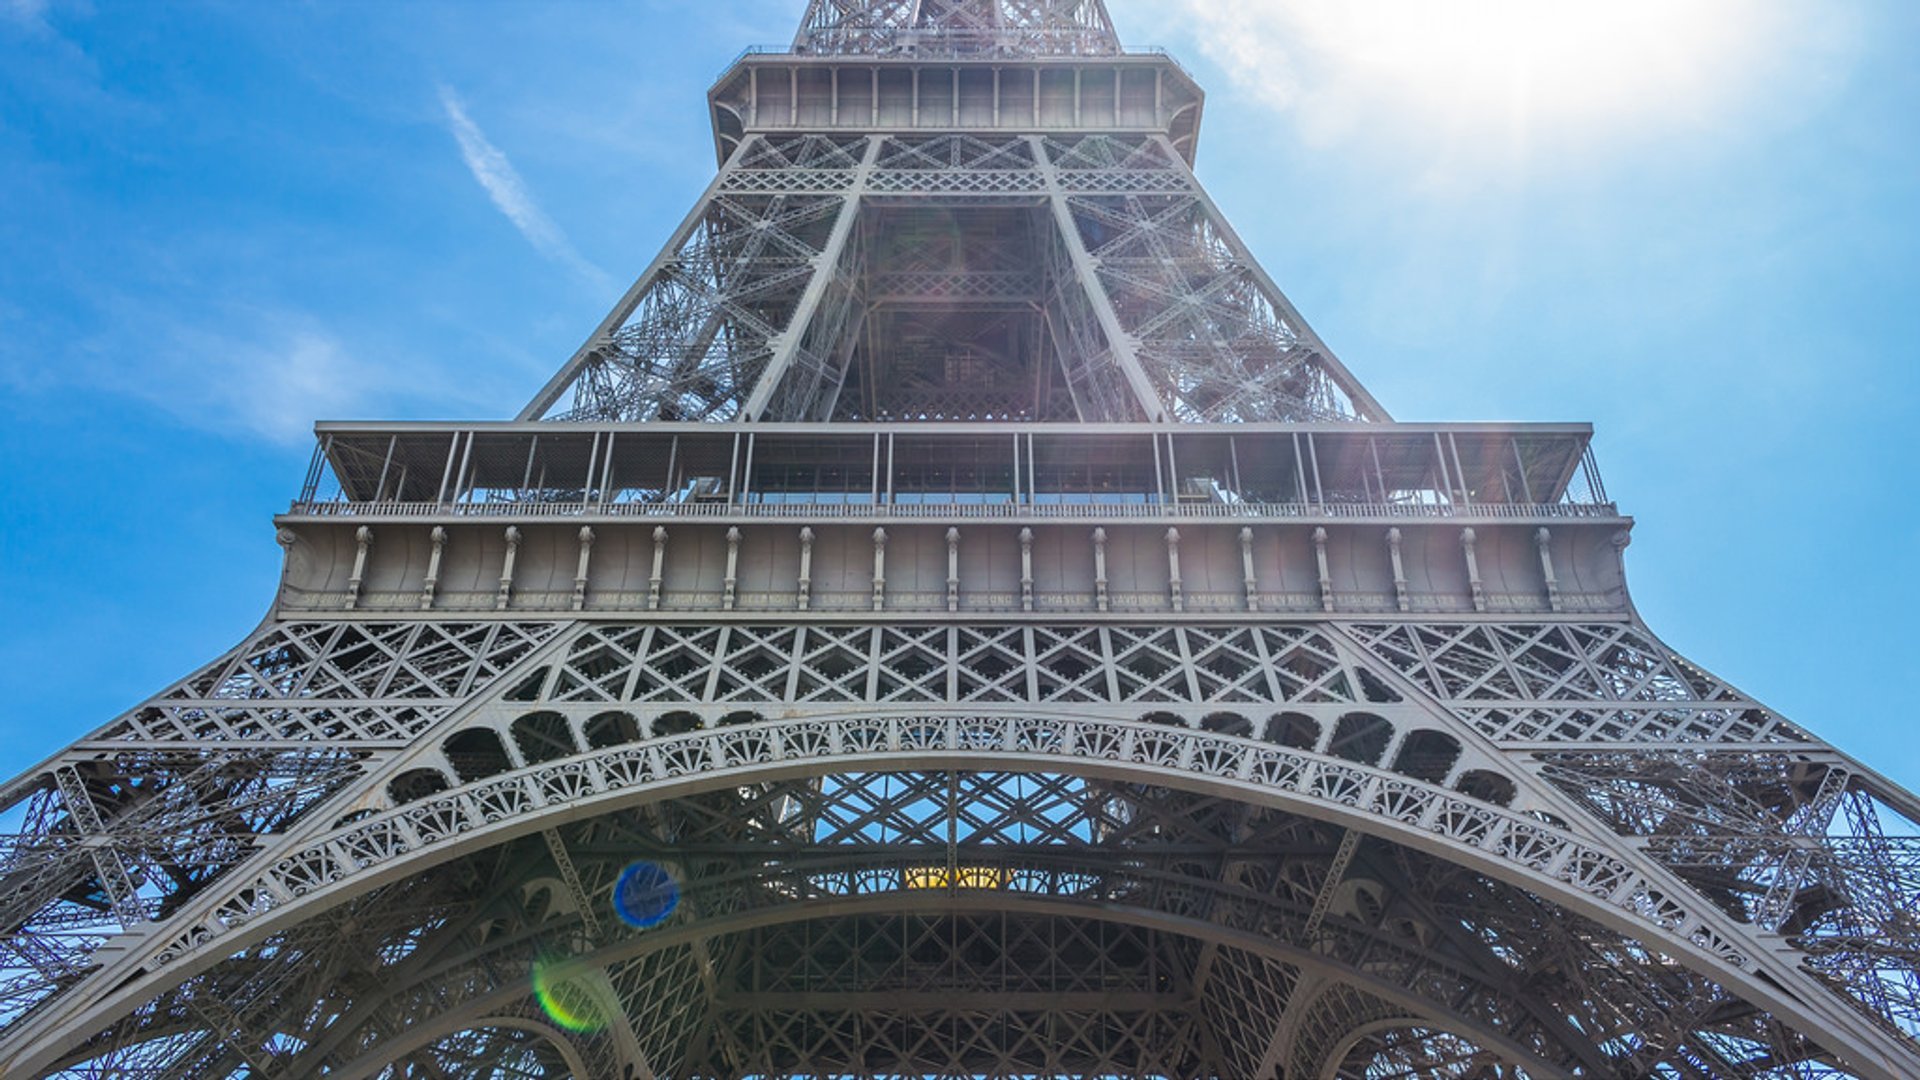 Repainting the Eiffel Tower